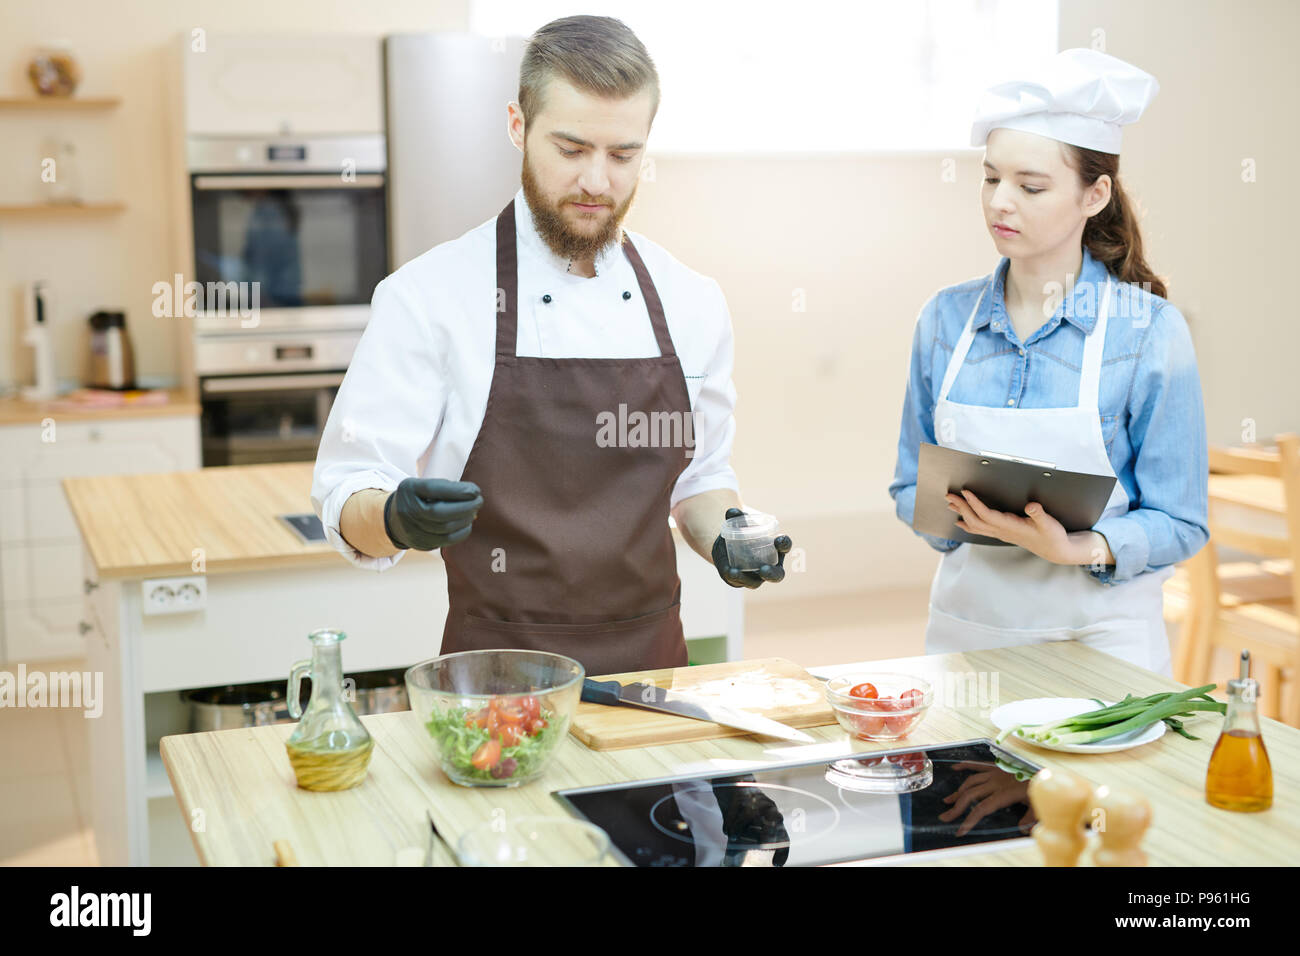 Young Professional Chef Working in Restaurant Stock Photo